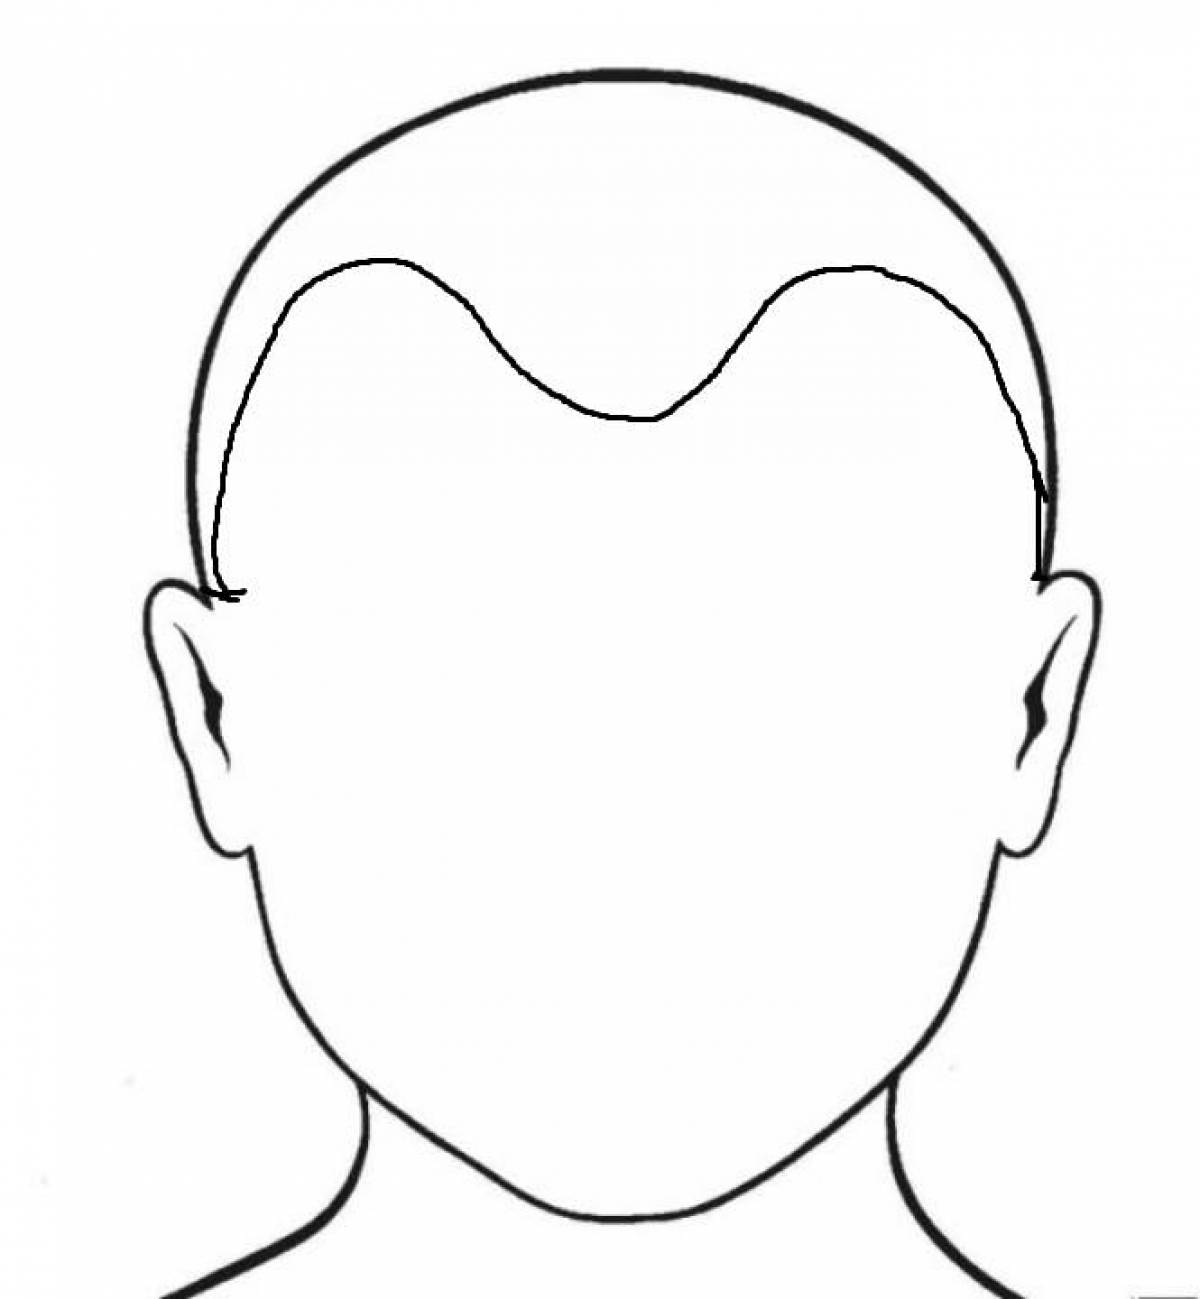 Coloring page of a serene human face